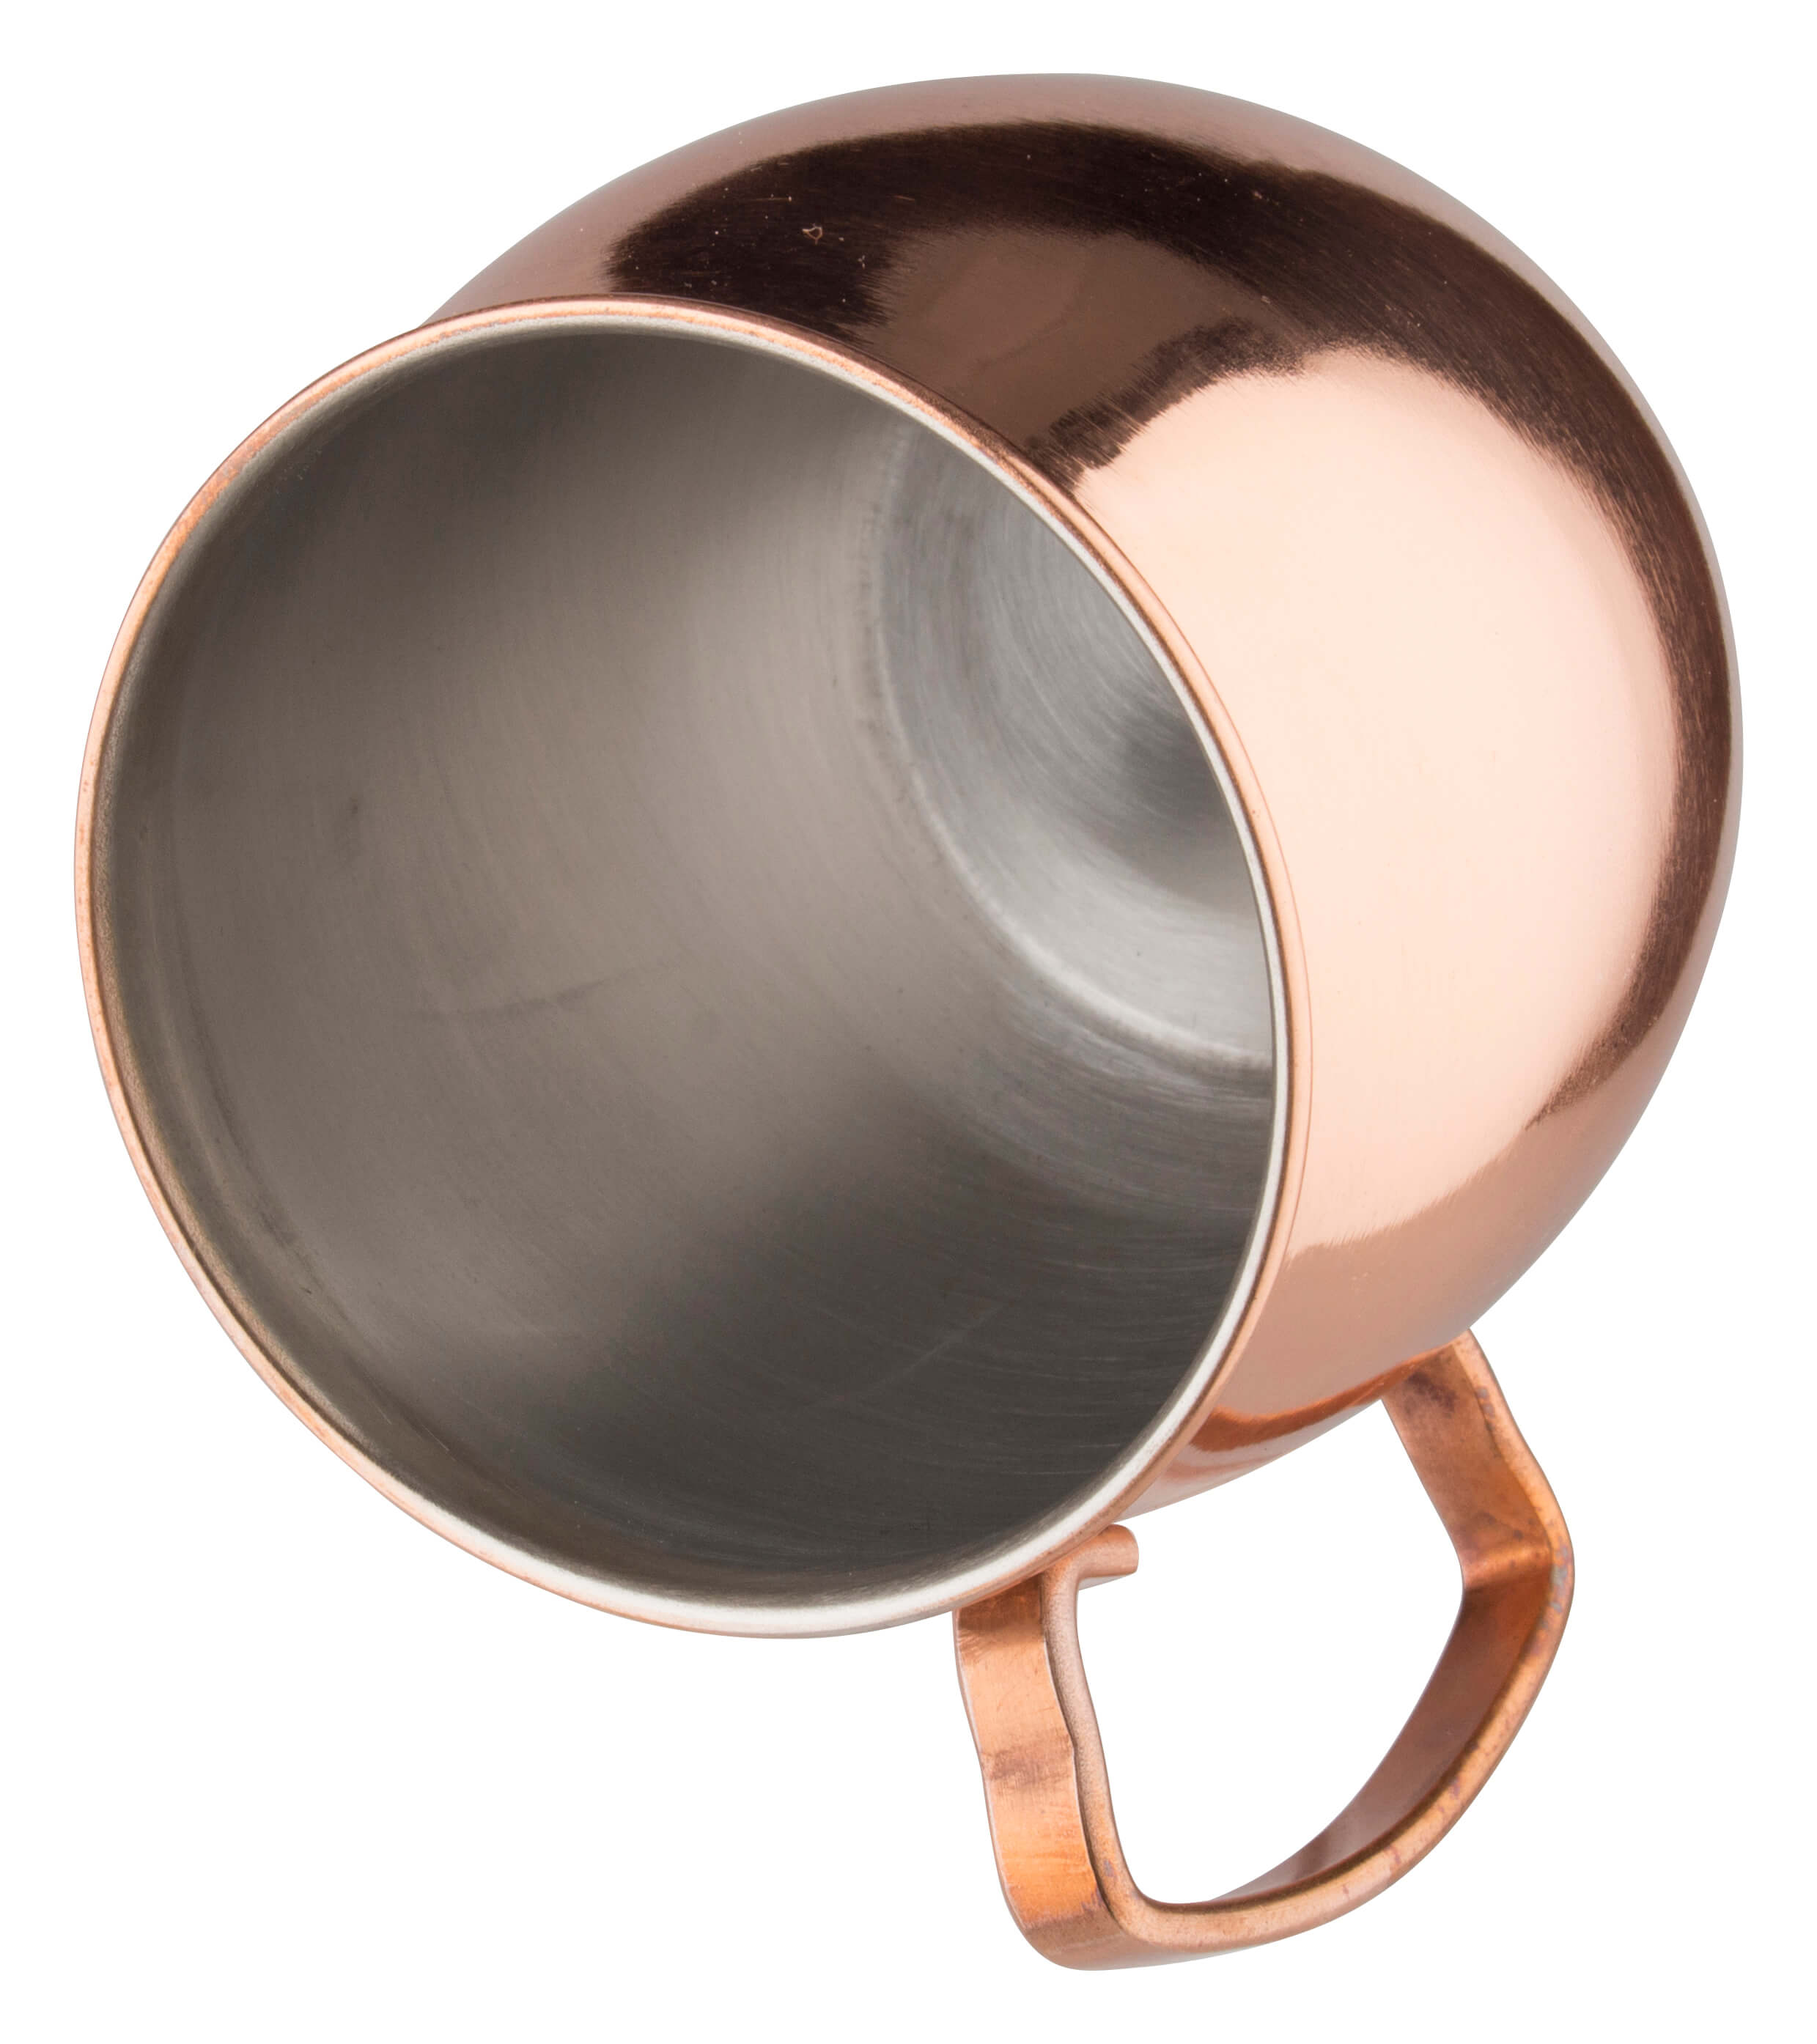 Stainless steel mug Moscow Mule, copper colored, Prime Bar - 400ml